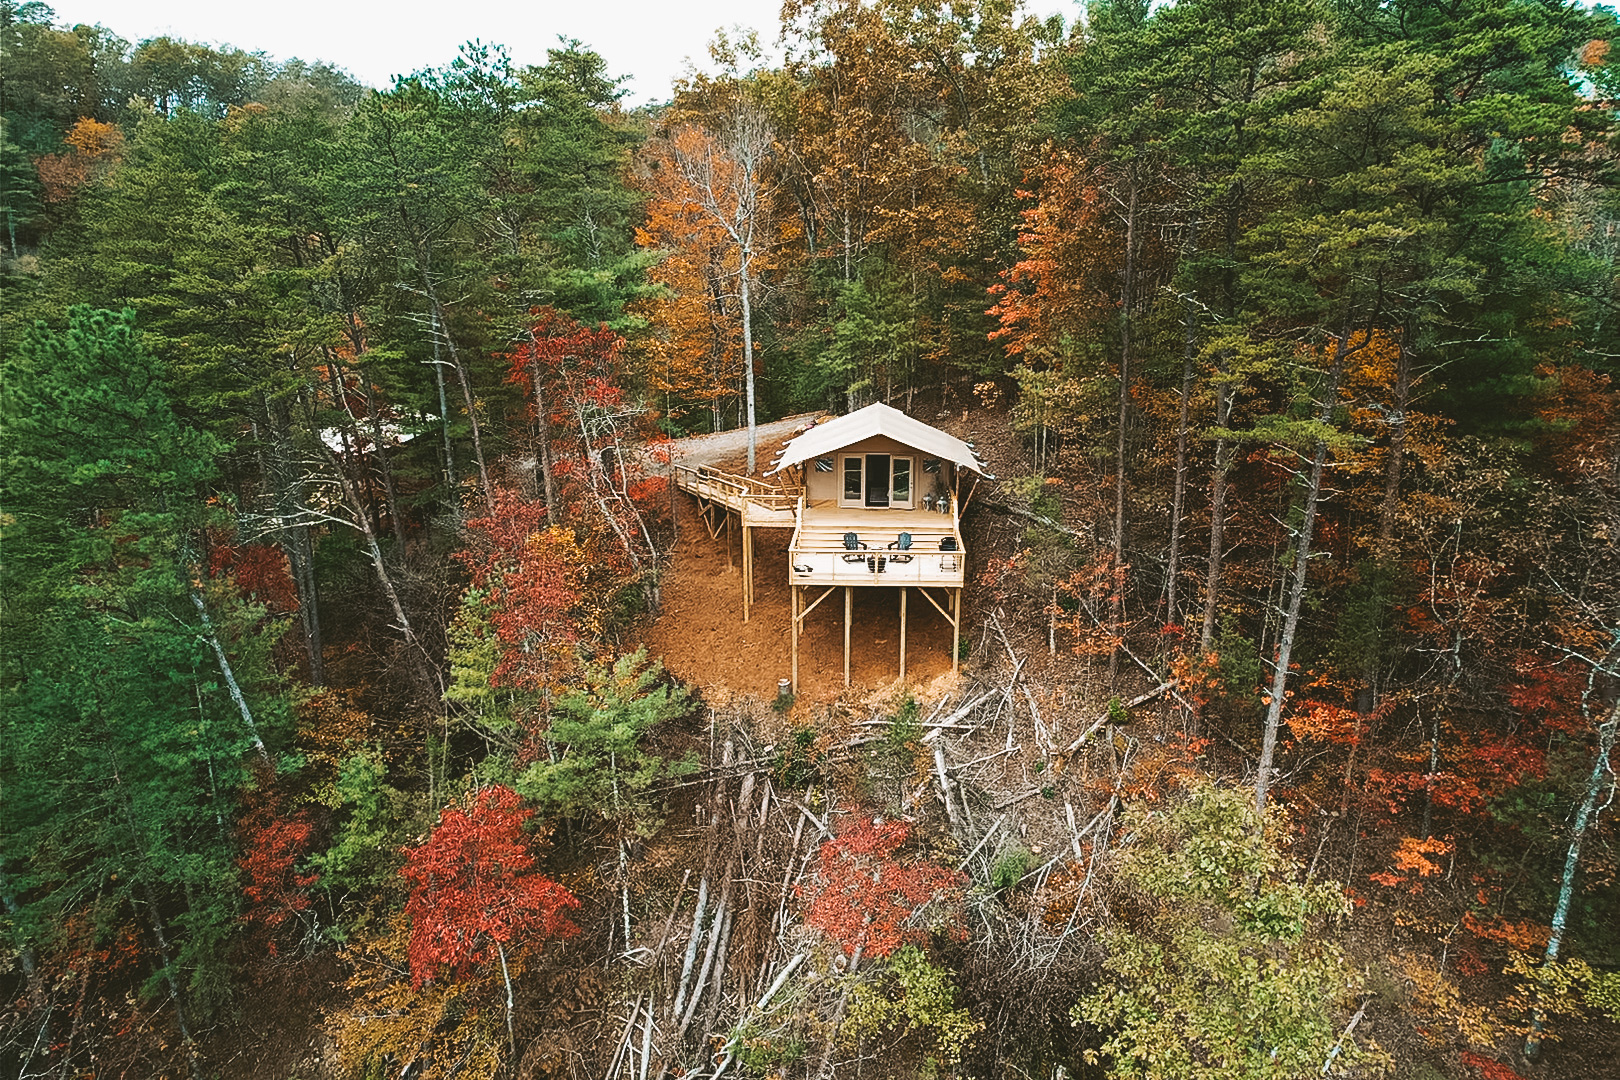 From cabins to elevated tents, Thunderhead Ridge Cabin Rentals offers a unique variety of ways to stay comfortably in the Smoky Mountains! Each of our properties is equipped with amenities to make your stay a memorable one.